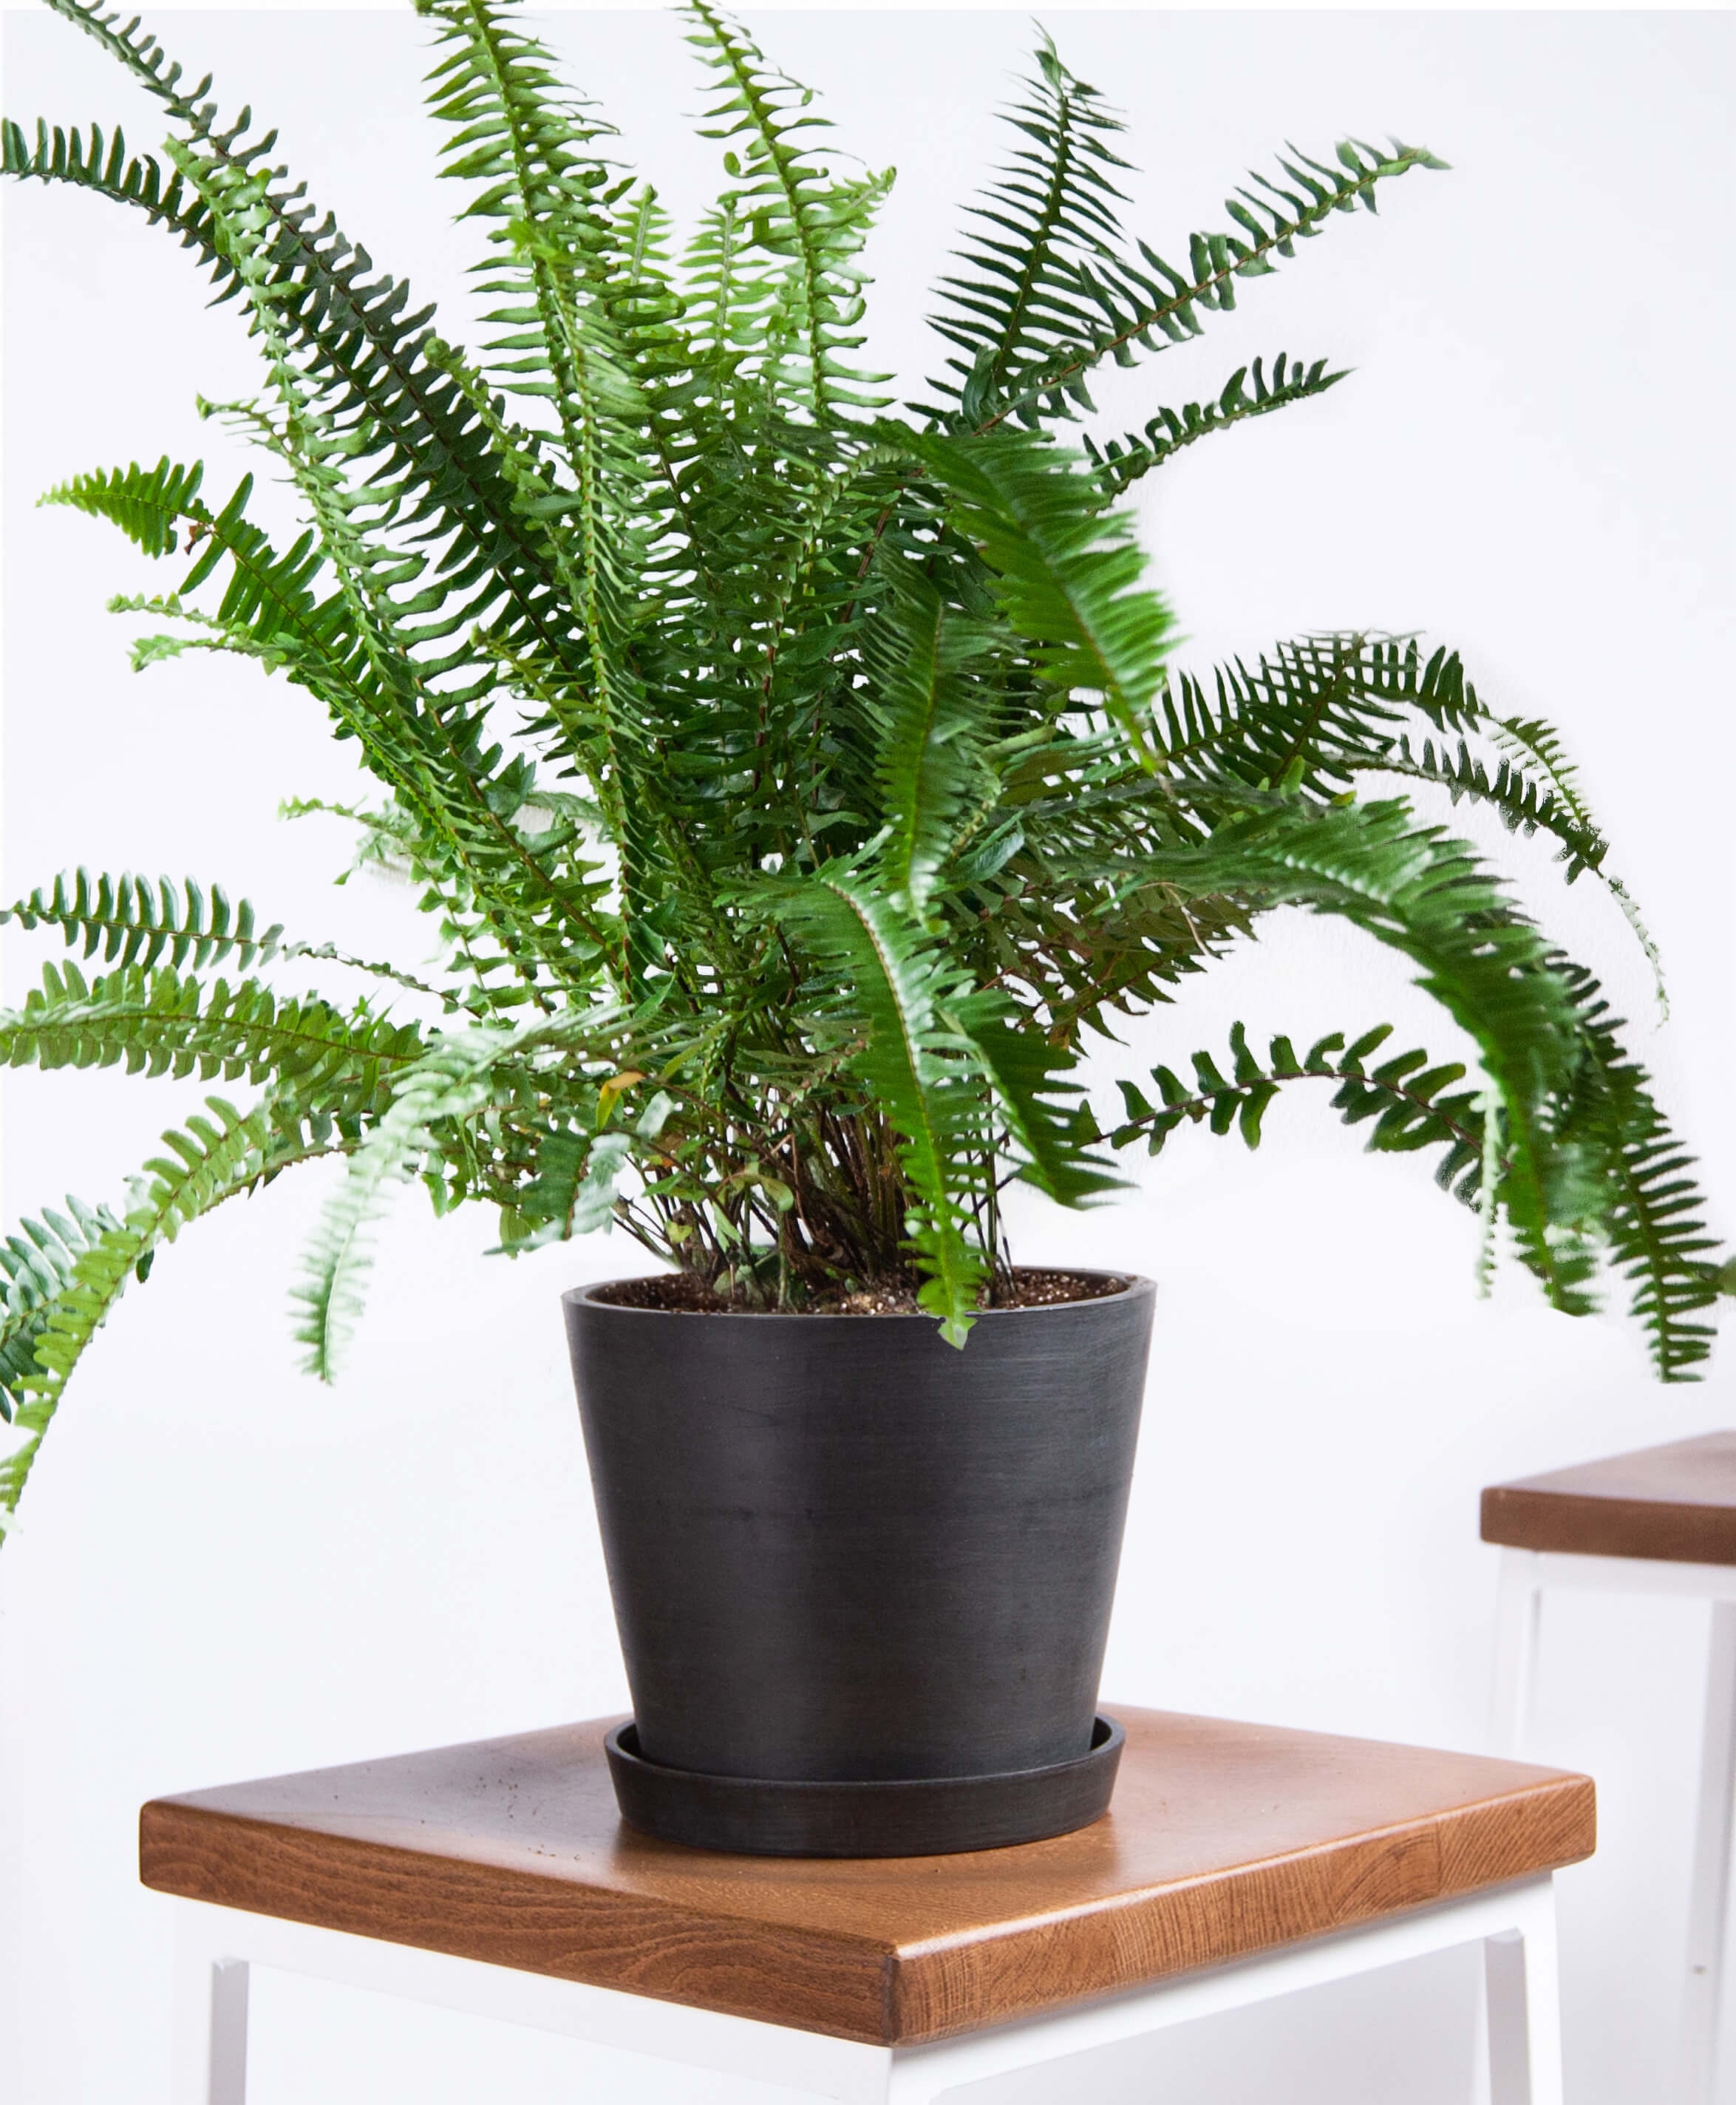 Kimberly queen fern - Stone - Image 0